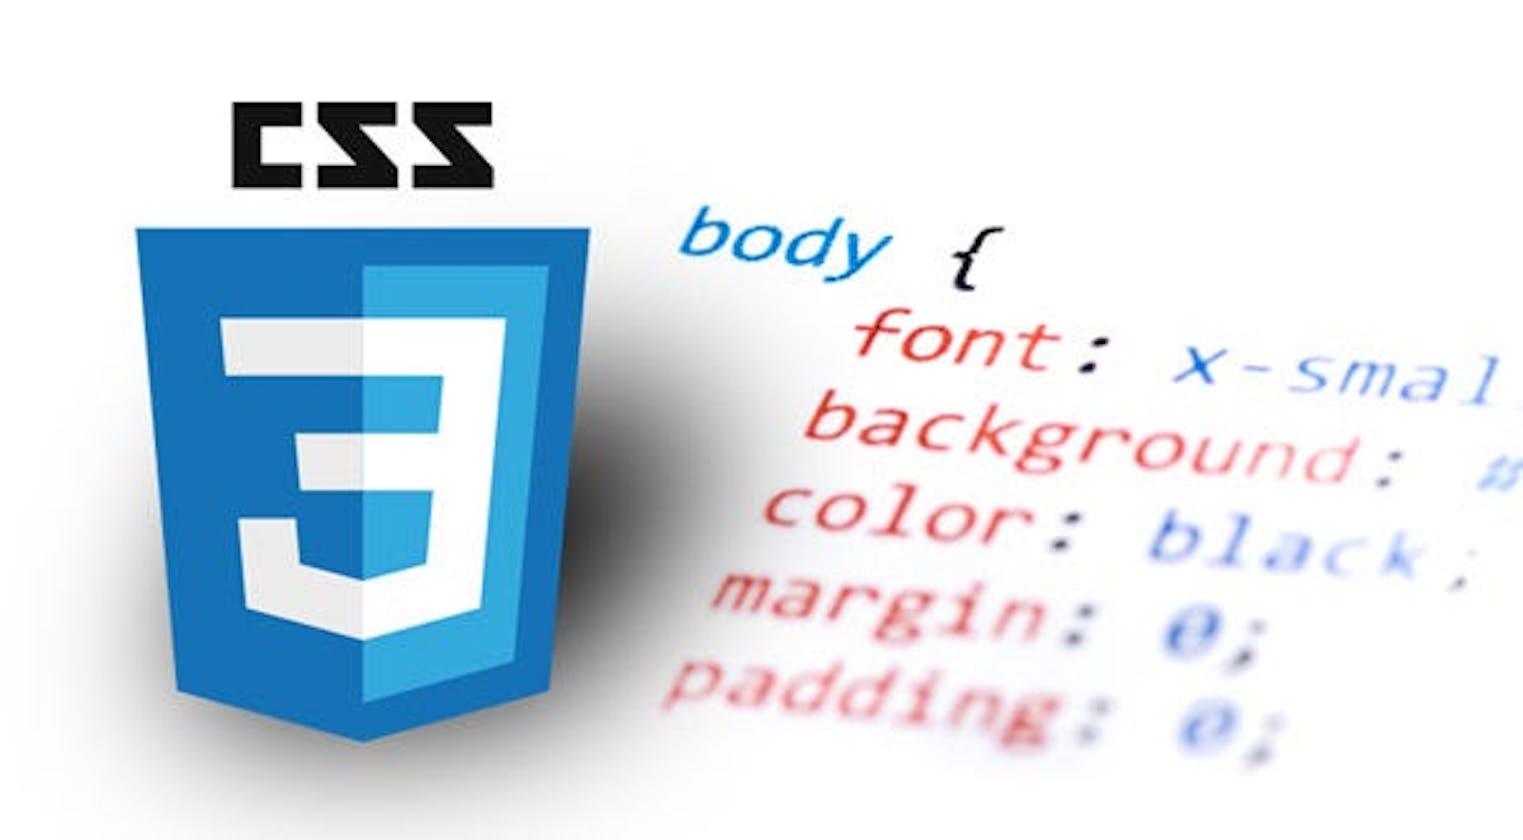 Level up your CSS skills